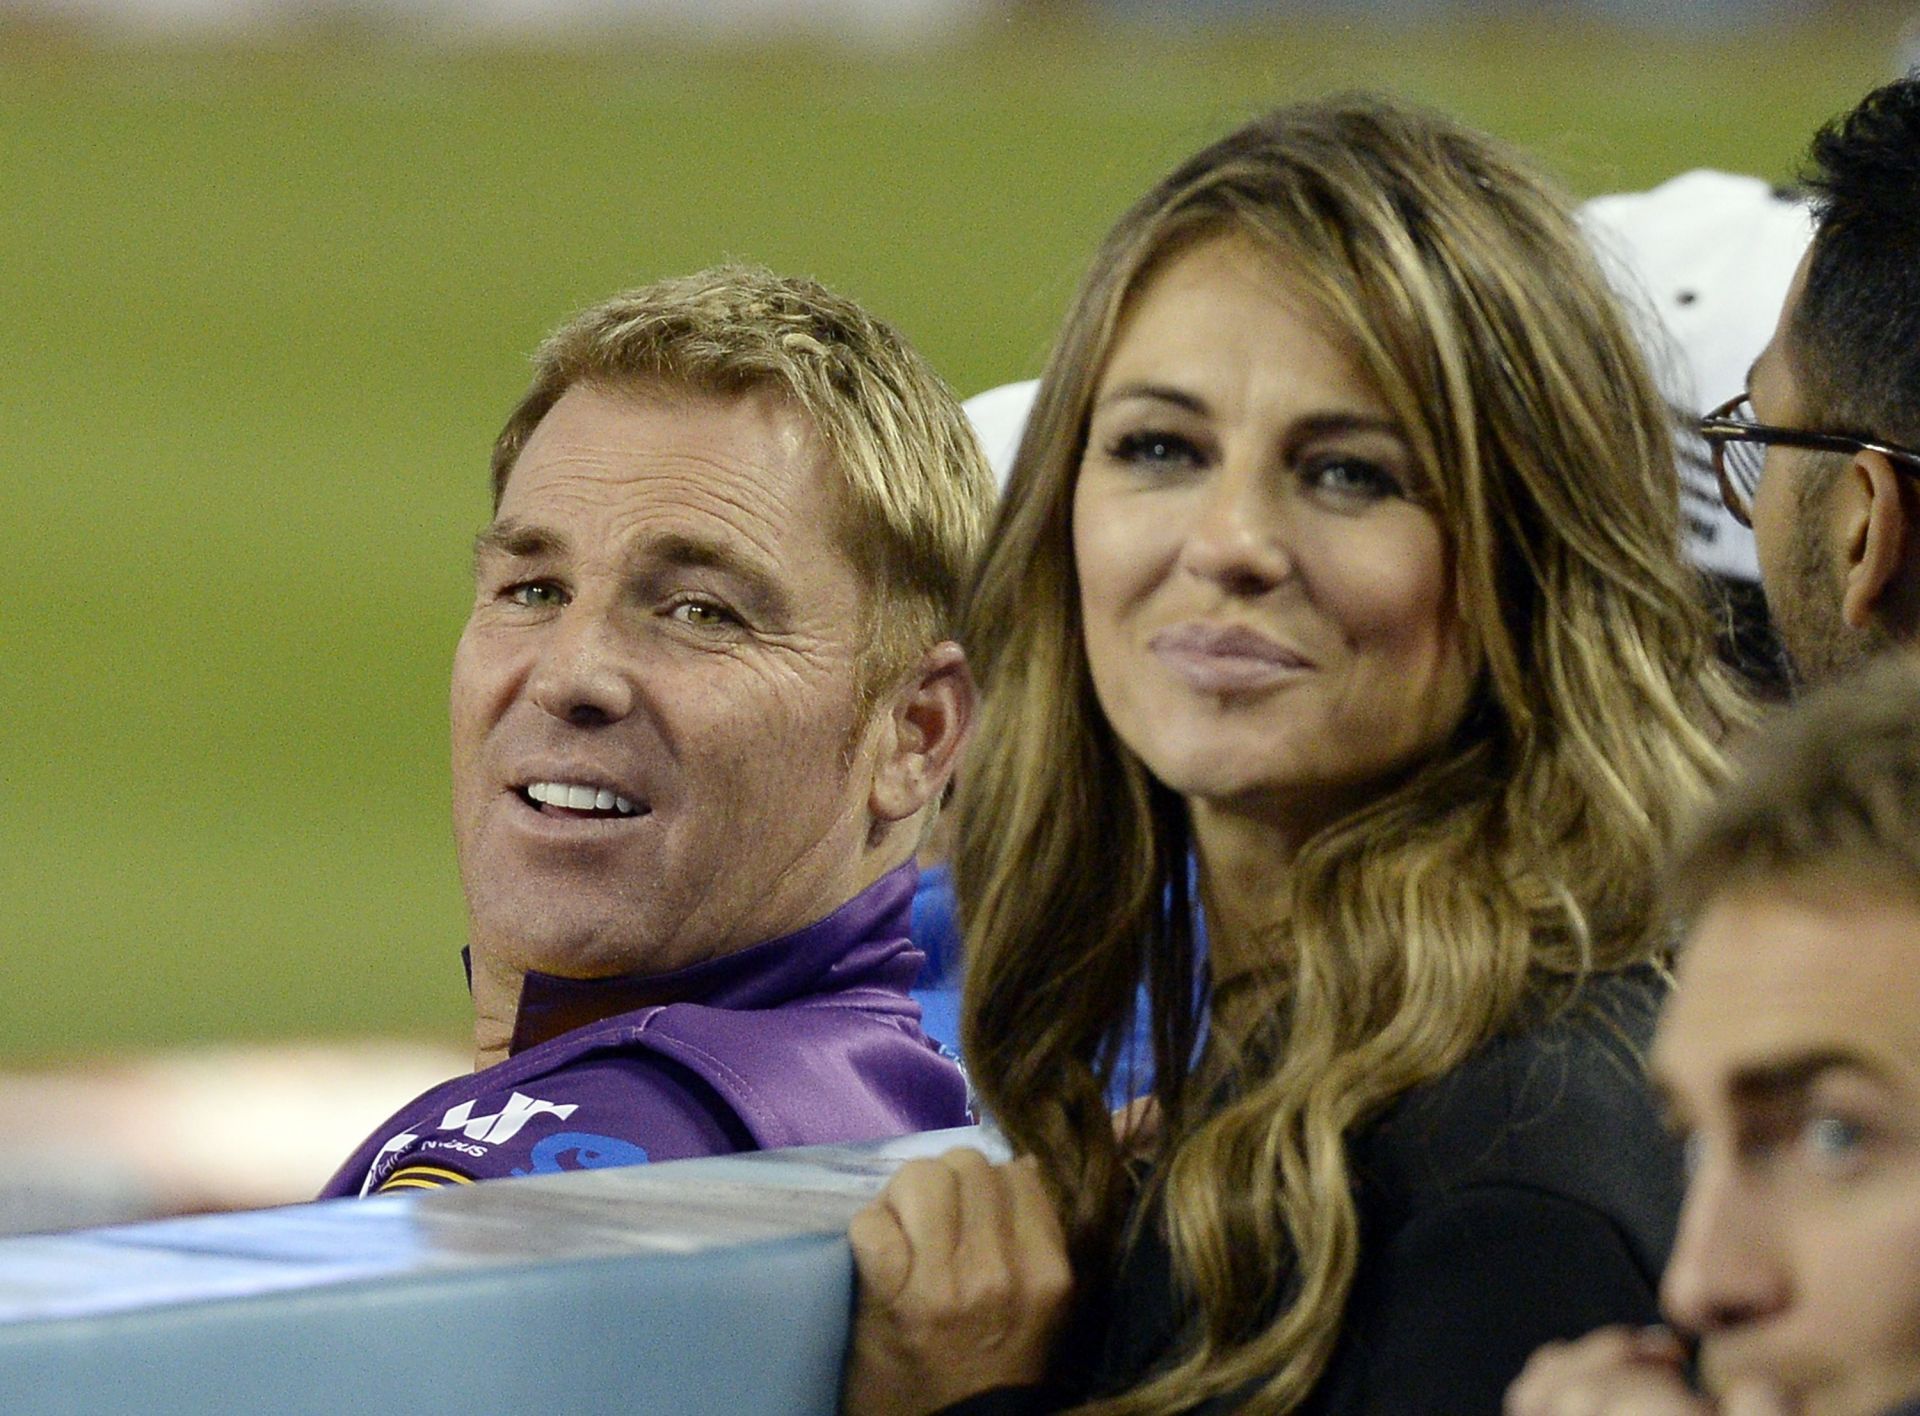 Elizabeth Hurley (right) poses with Shane Warne. Pic: Getty Images